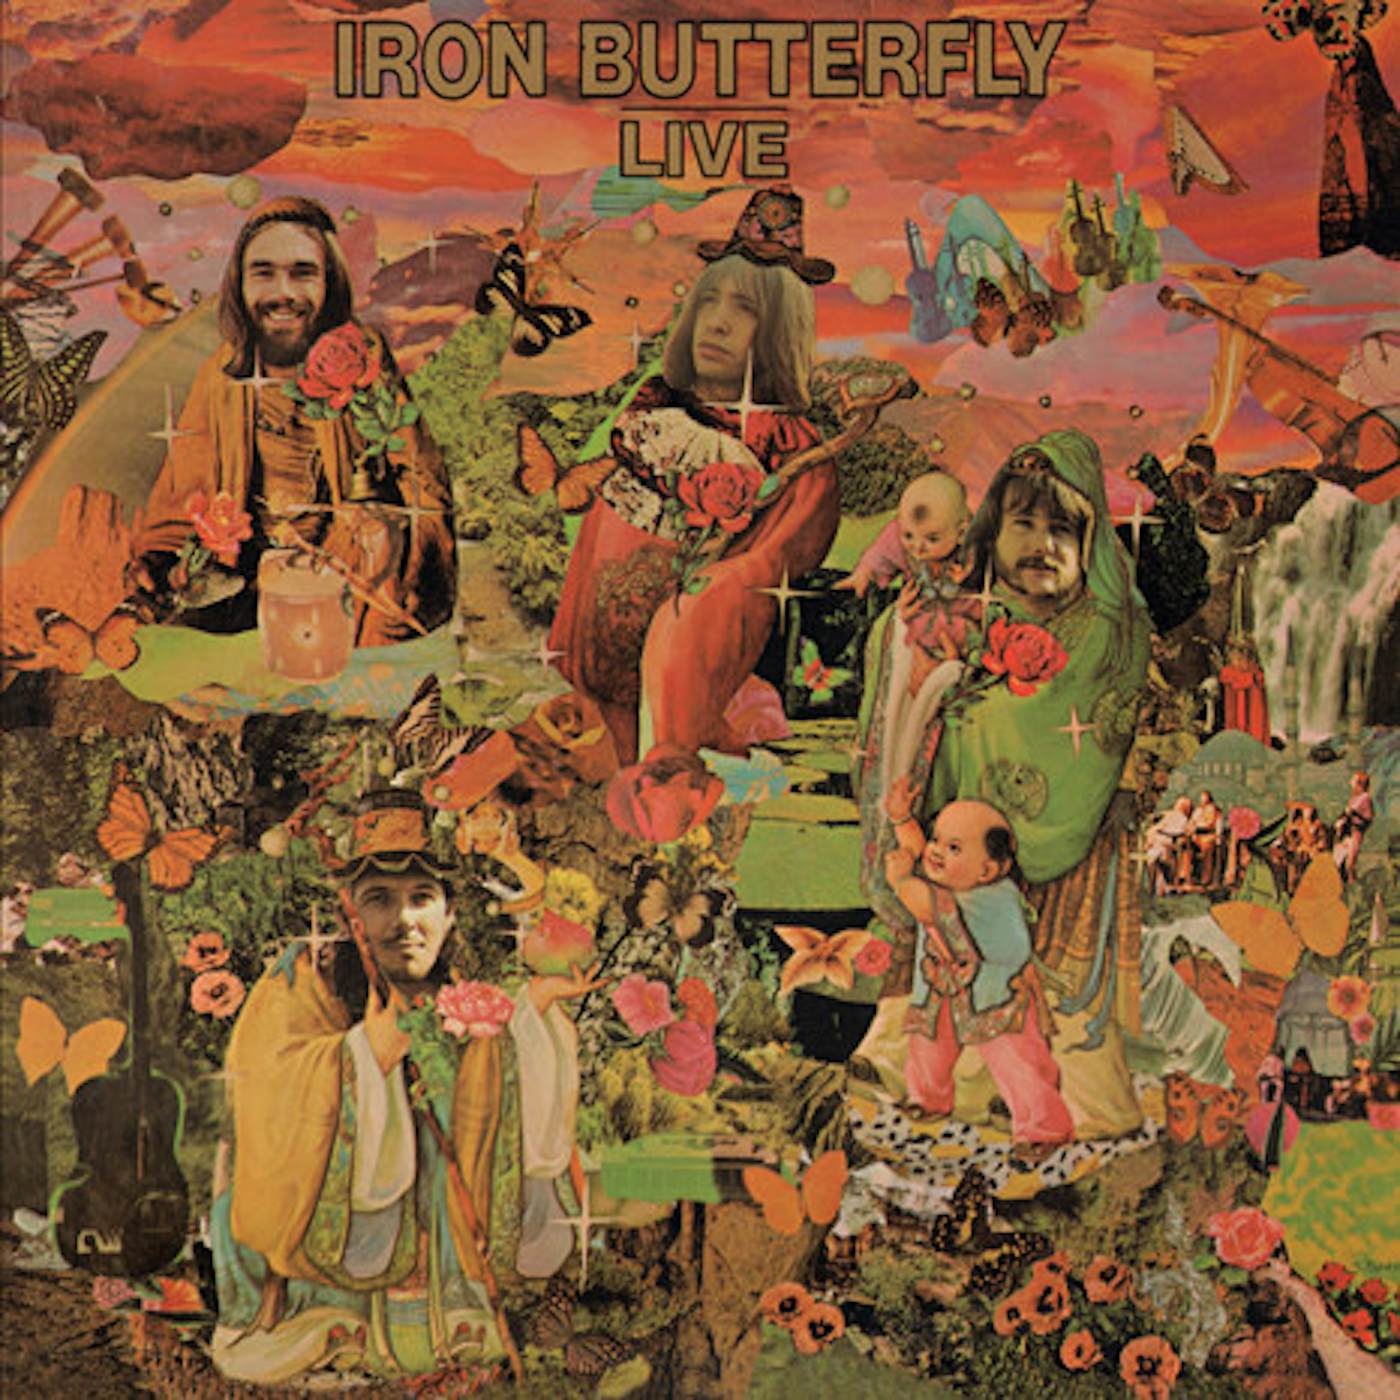 IRON BUTTERFLY LIVE Vinyl Record